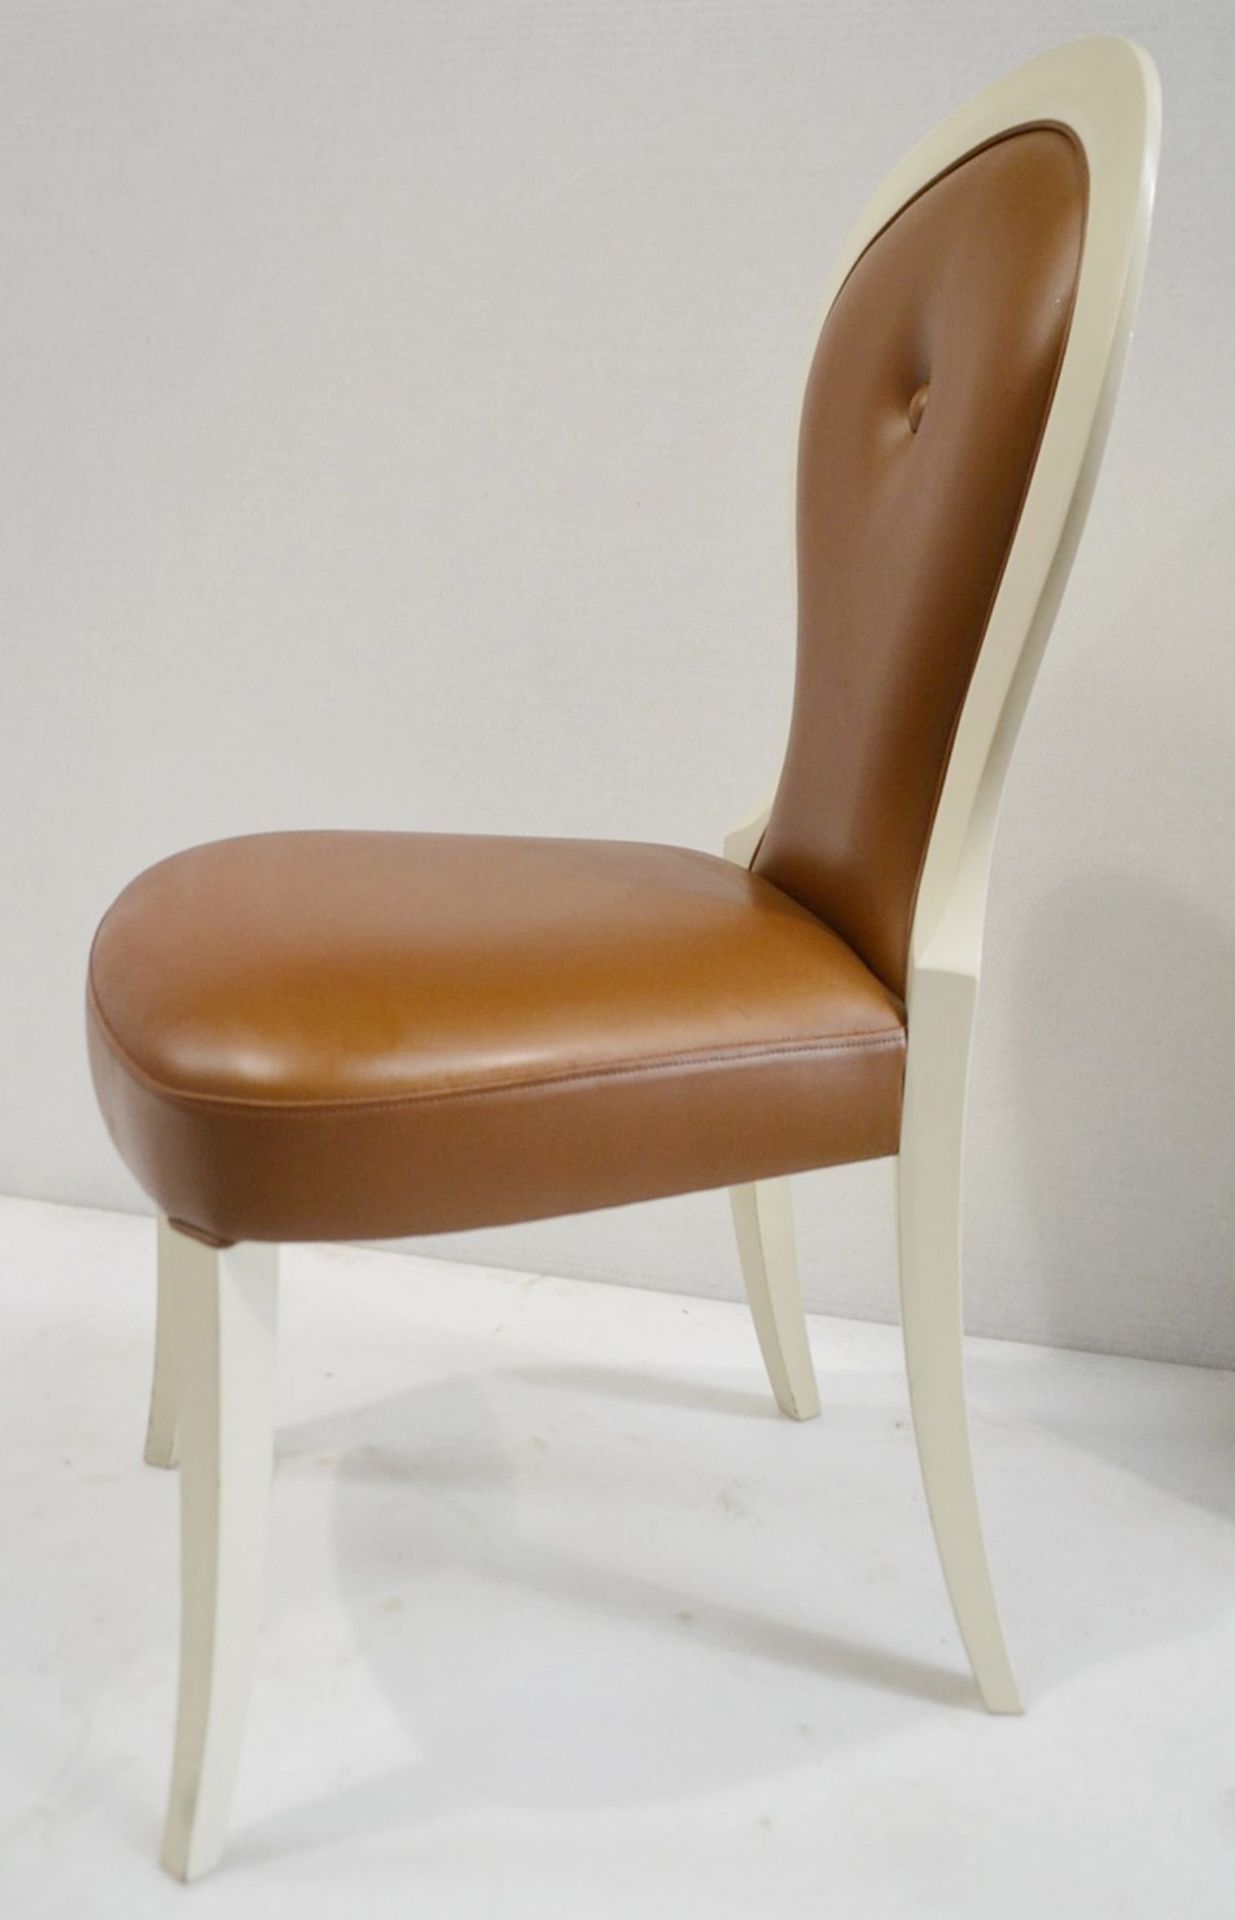 1 x Cushion Backed Chair With Curved Legs - Dimensions: H100 x W49 x D50cm / Seat 48cm - Ref: HMS126 - Image 3 of 7